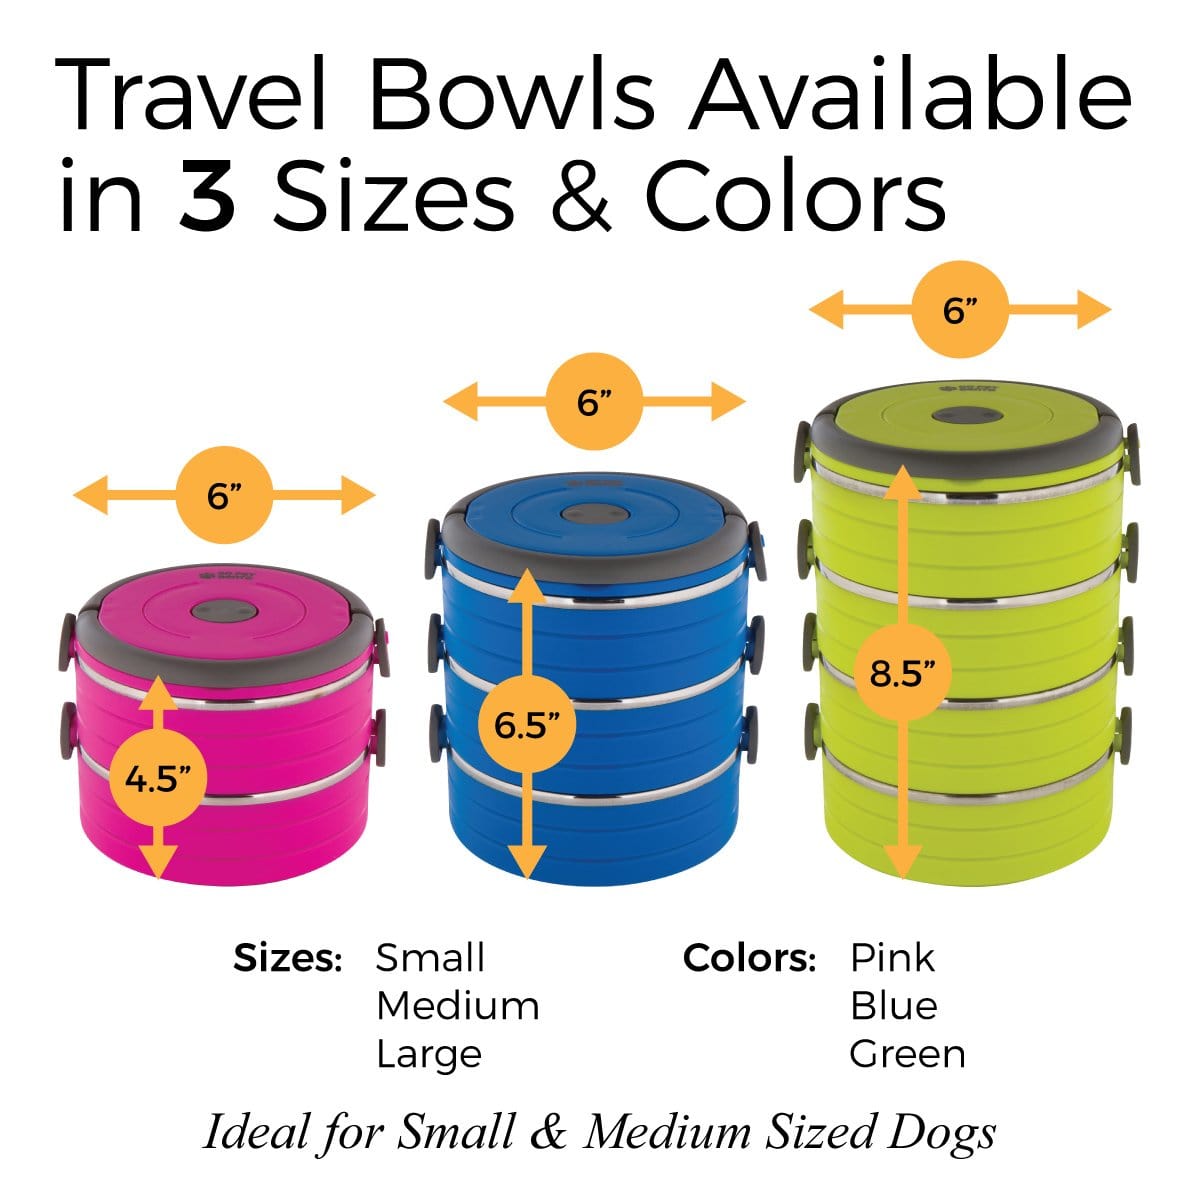 My Pet Pail - The Modern Travel Lunch Box for Dogs On The Go.